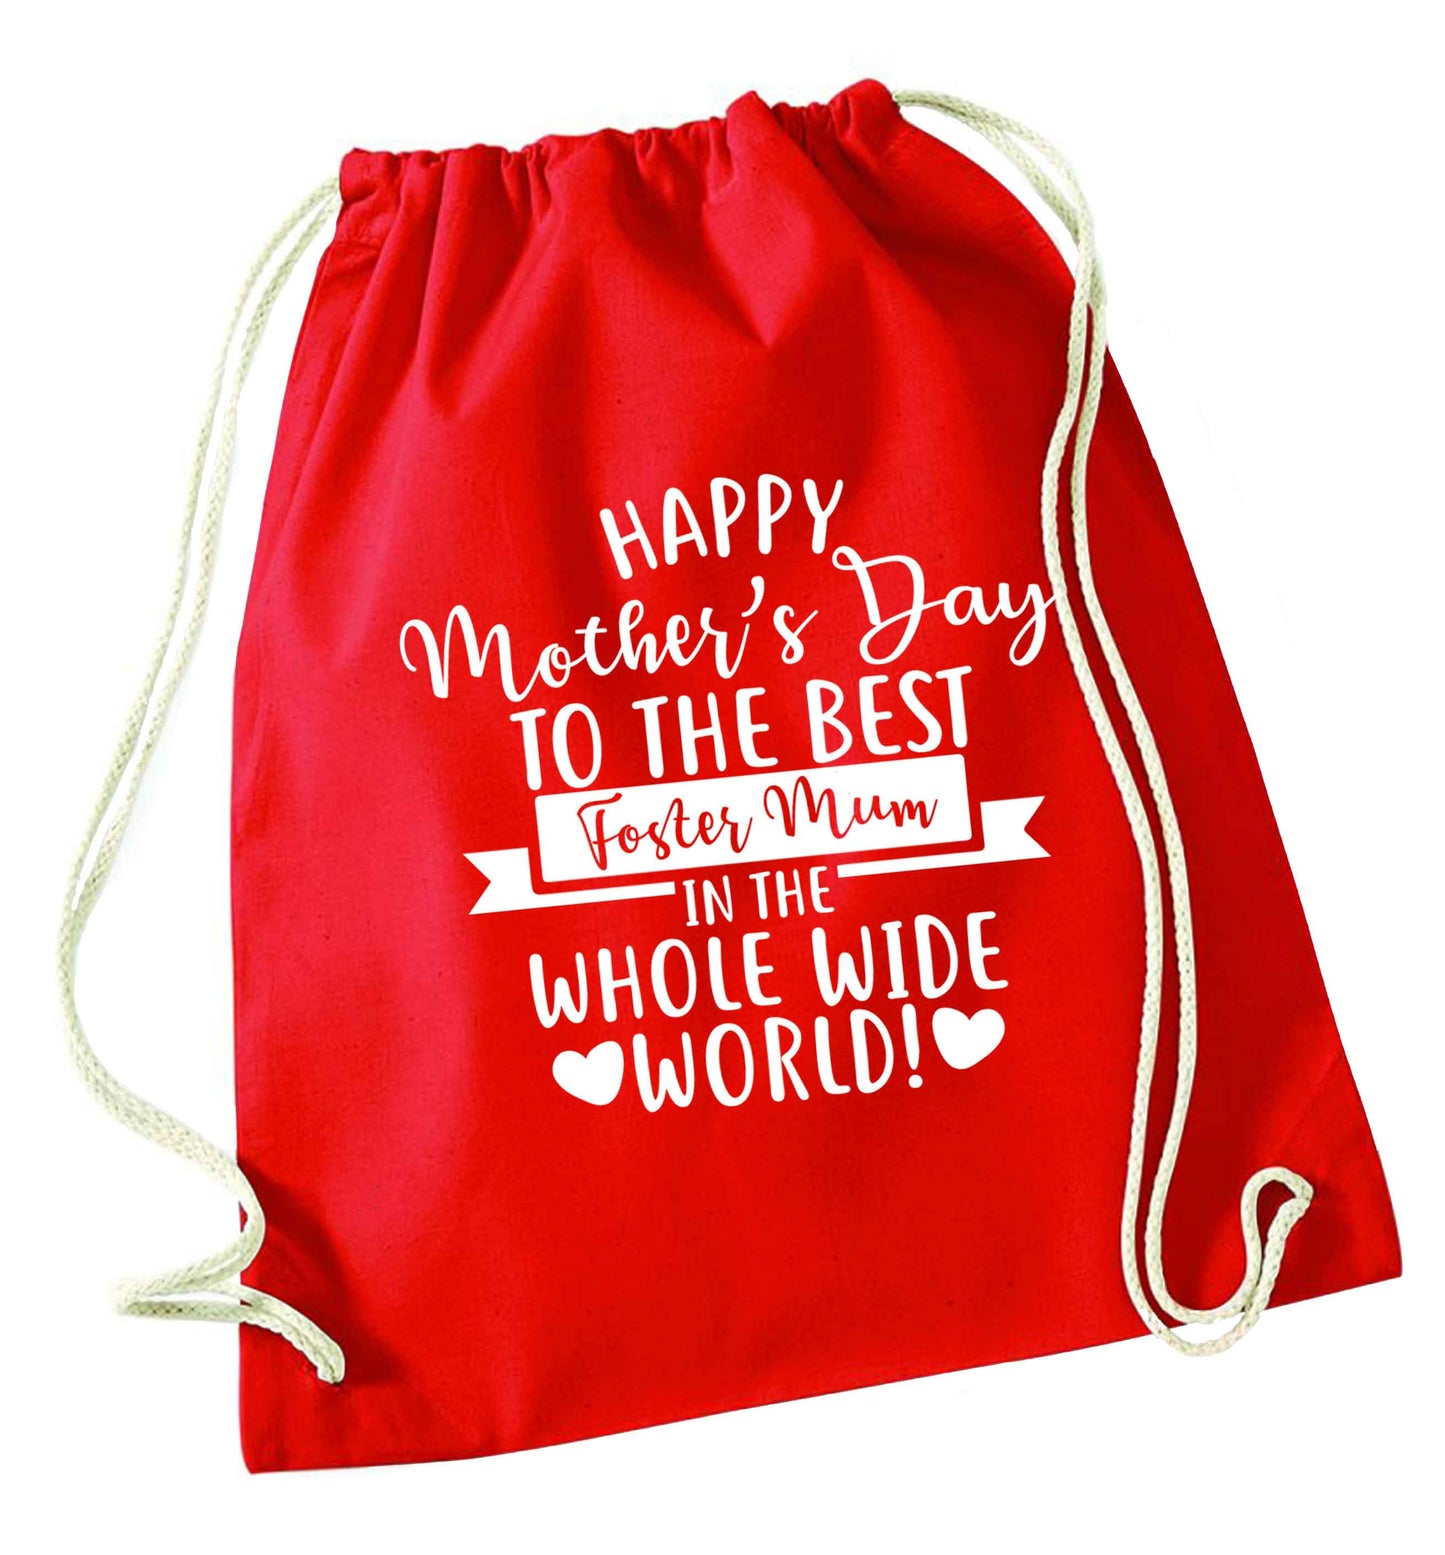 Happy mother's day to the best foster mum in the world red drawstring bag 